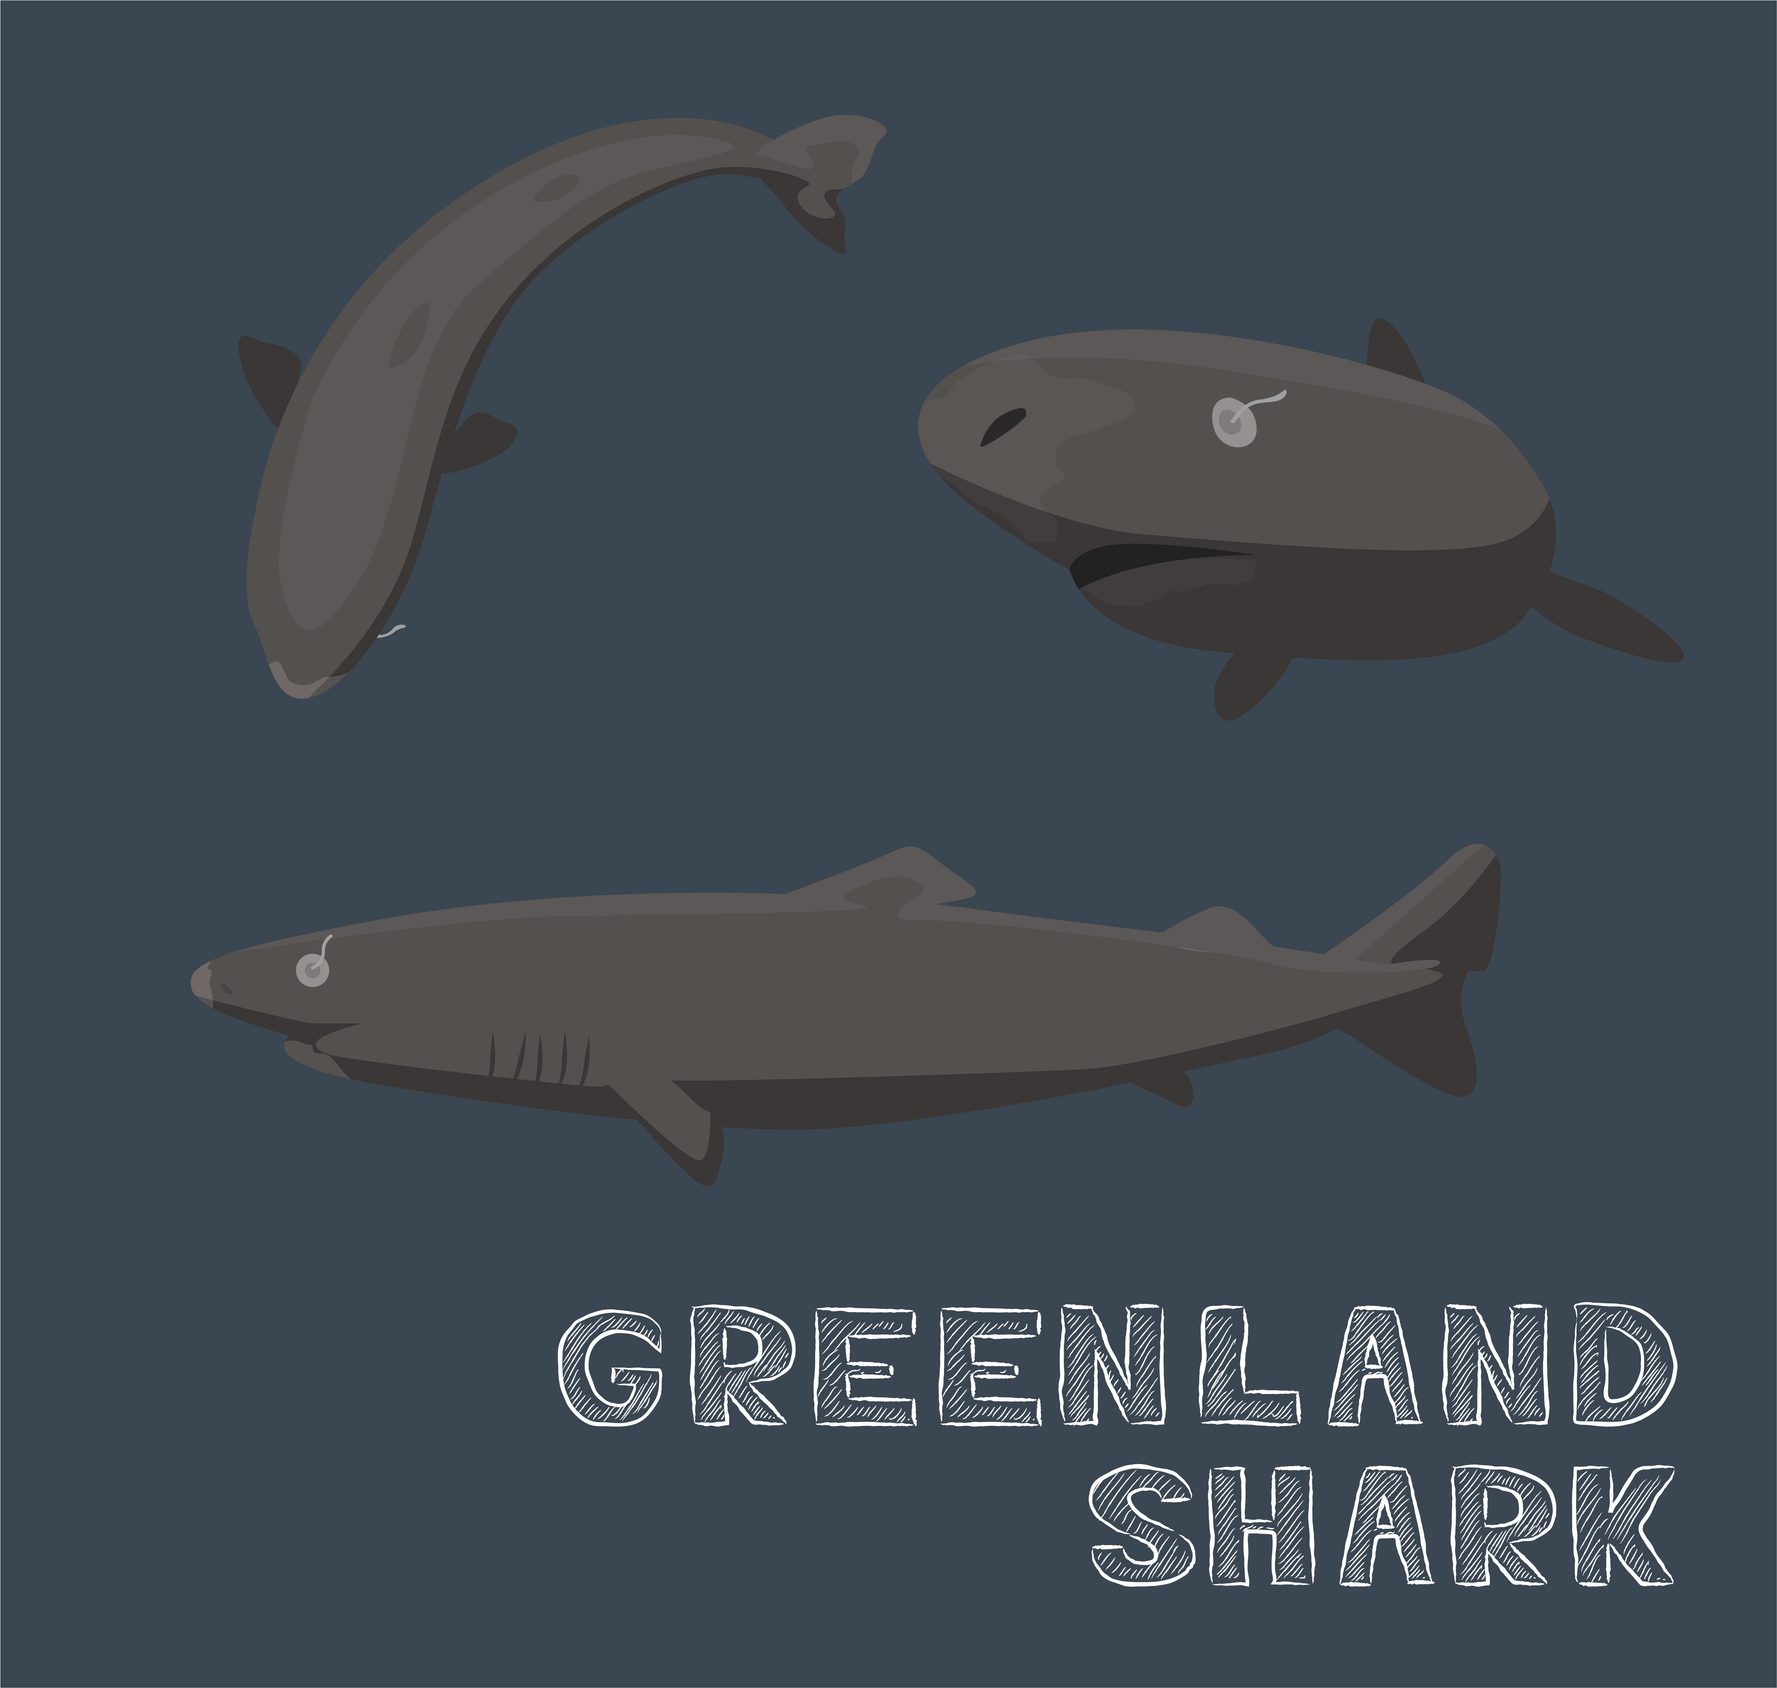 Illustration of three Greenland sharks swimming, with the caption &quot;Greenland Shark&quot; below them